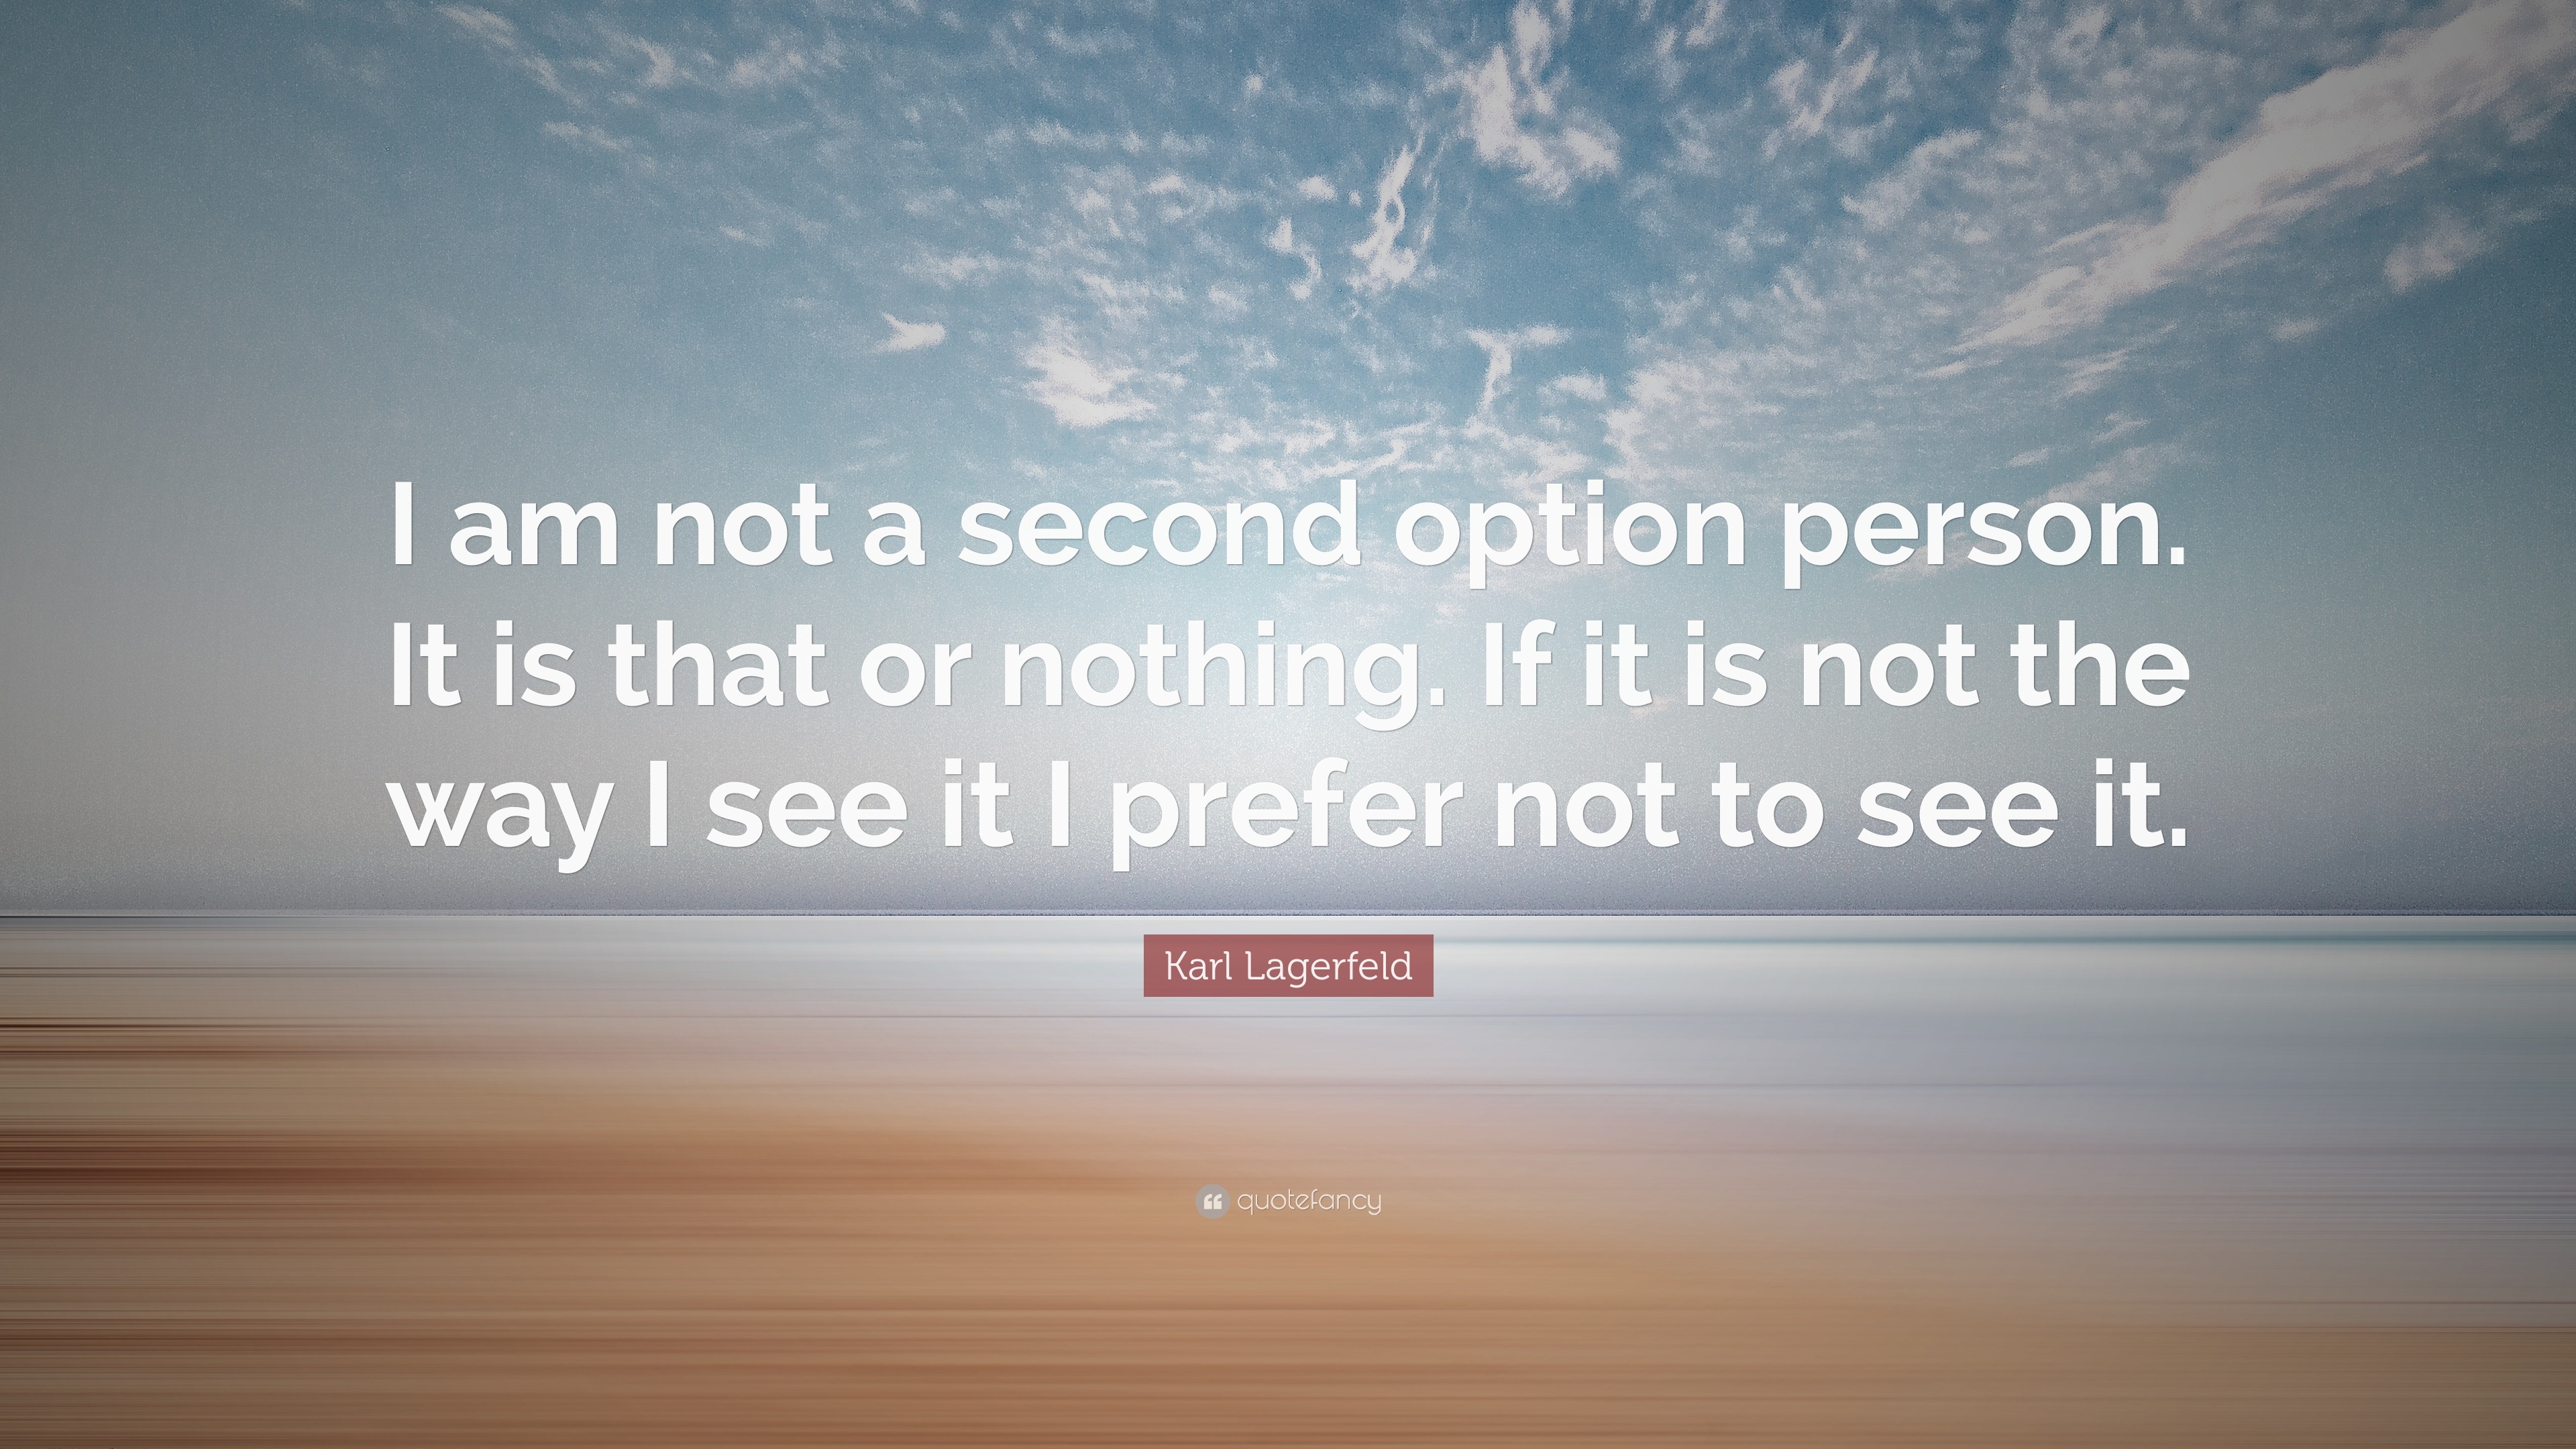 Karl Lagerfeld Quote: “I am not a second option person. It is that or ...